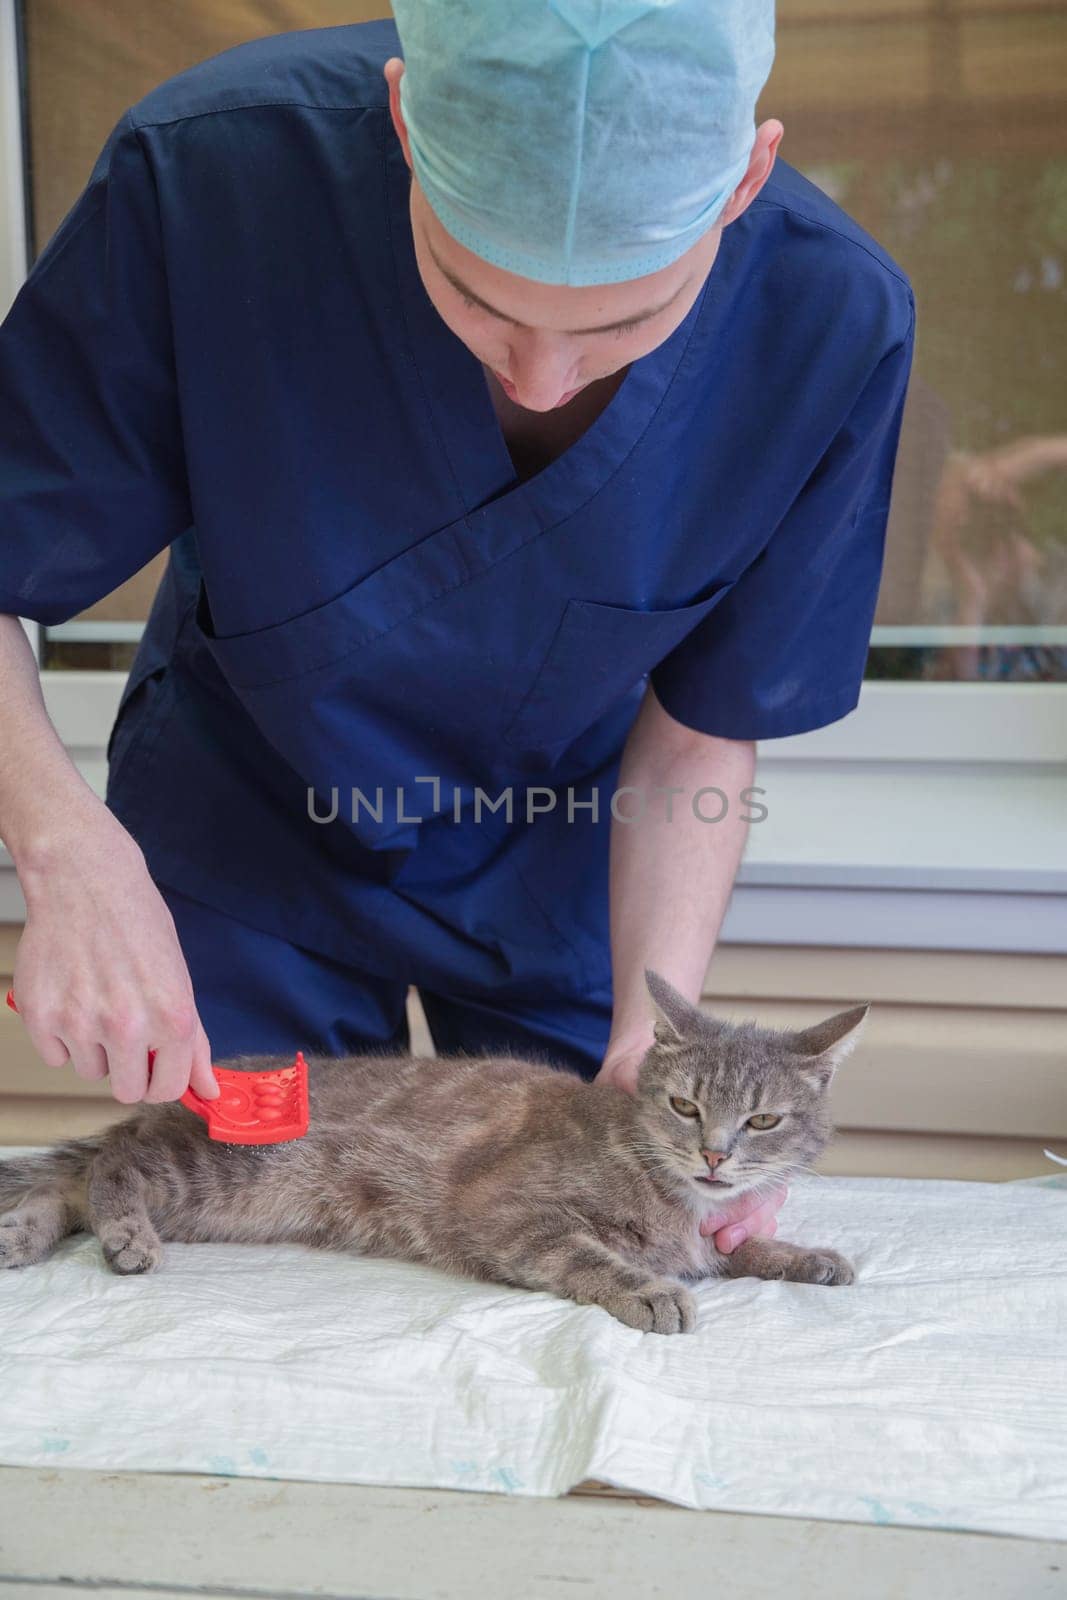 veterinarian combs a street gray kitten at the volunteer aid station free cat help, gives him first aid removes parasites, fleas, ticks. High quality photo